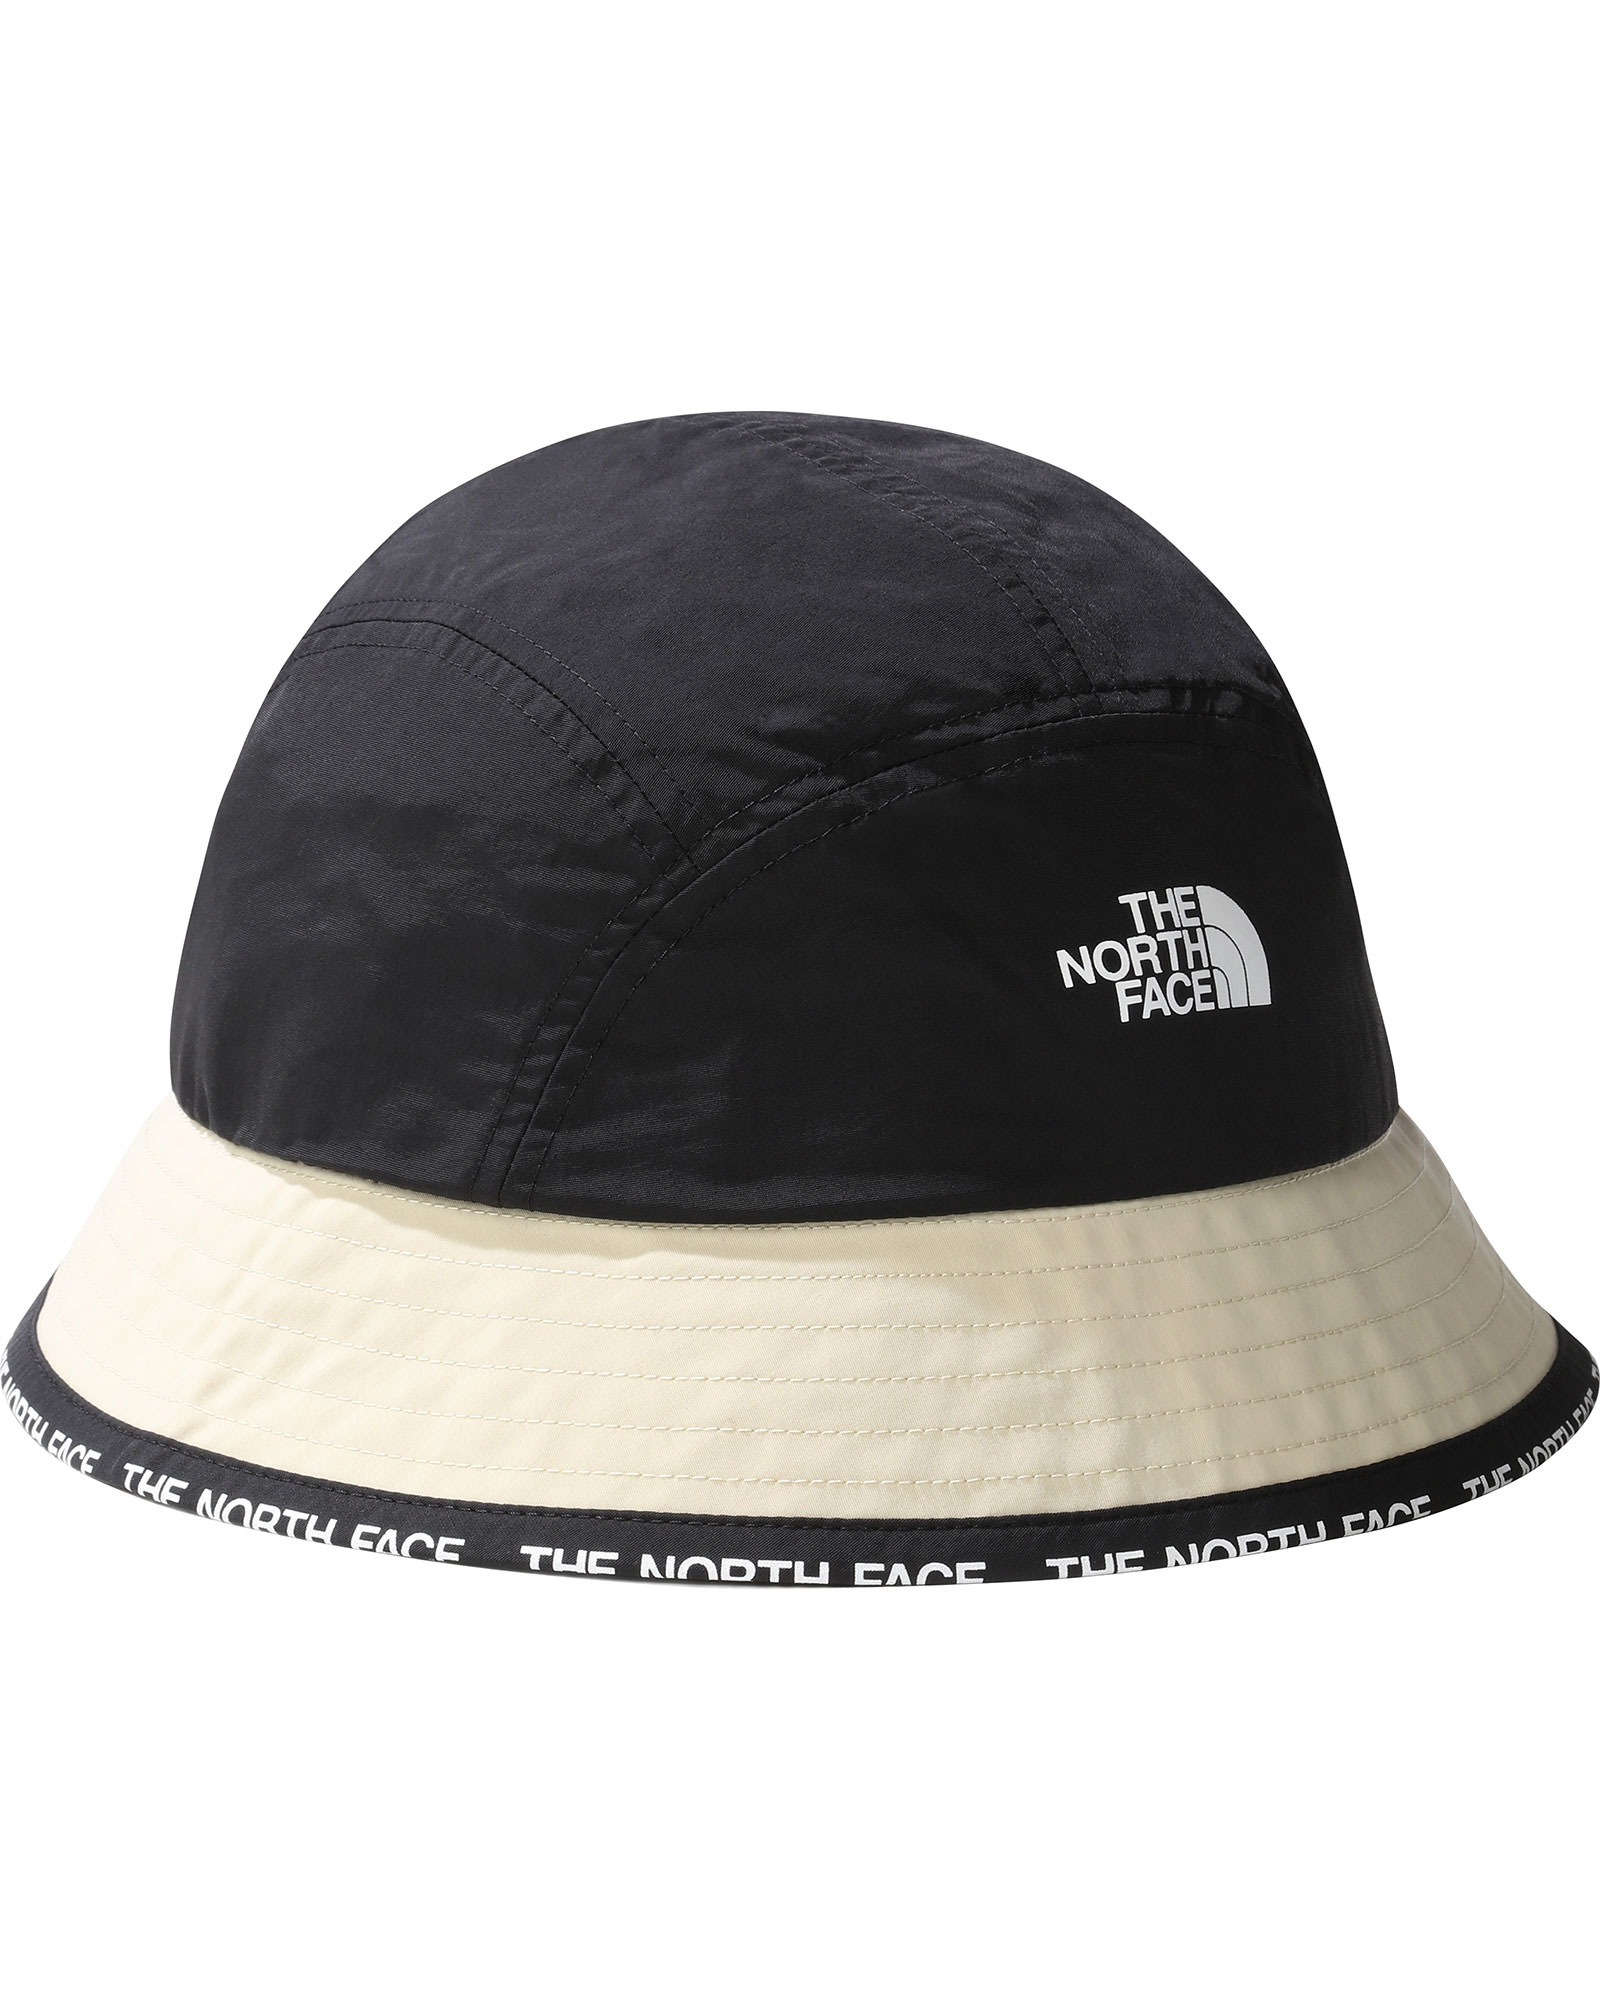 The North Face Cypress Bucket Hat - Gravel L/XL